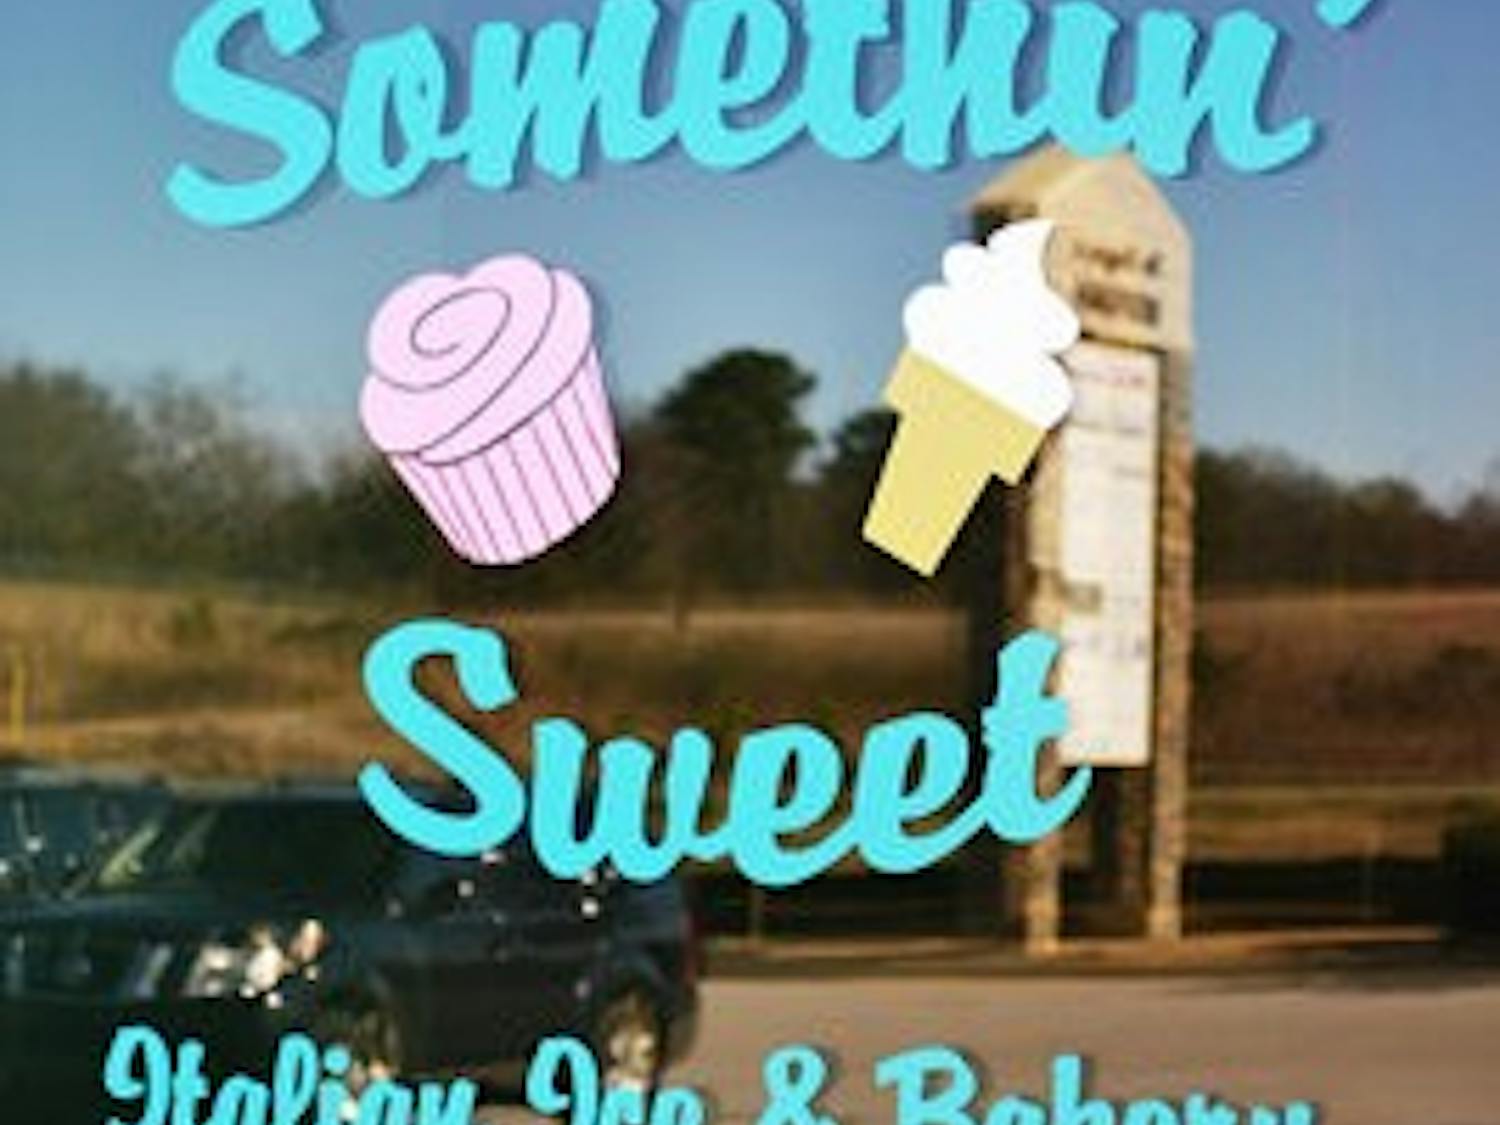 Jerrod and Kristy Woodham own Somethin' Sweet, where Kristy bakes everything by hand. (Raye May / PHOTO EDITOR)